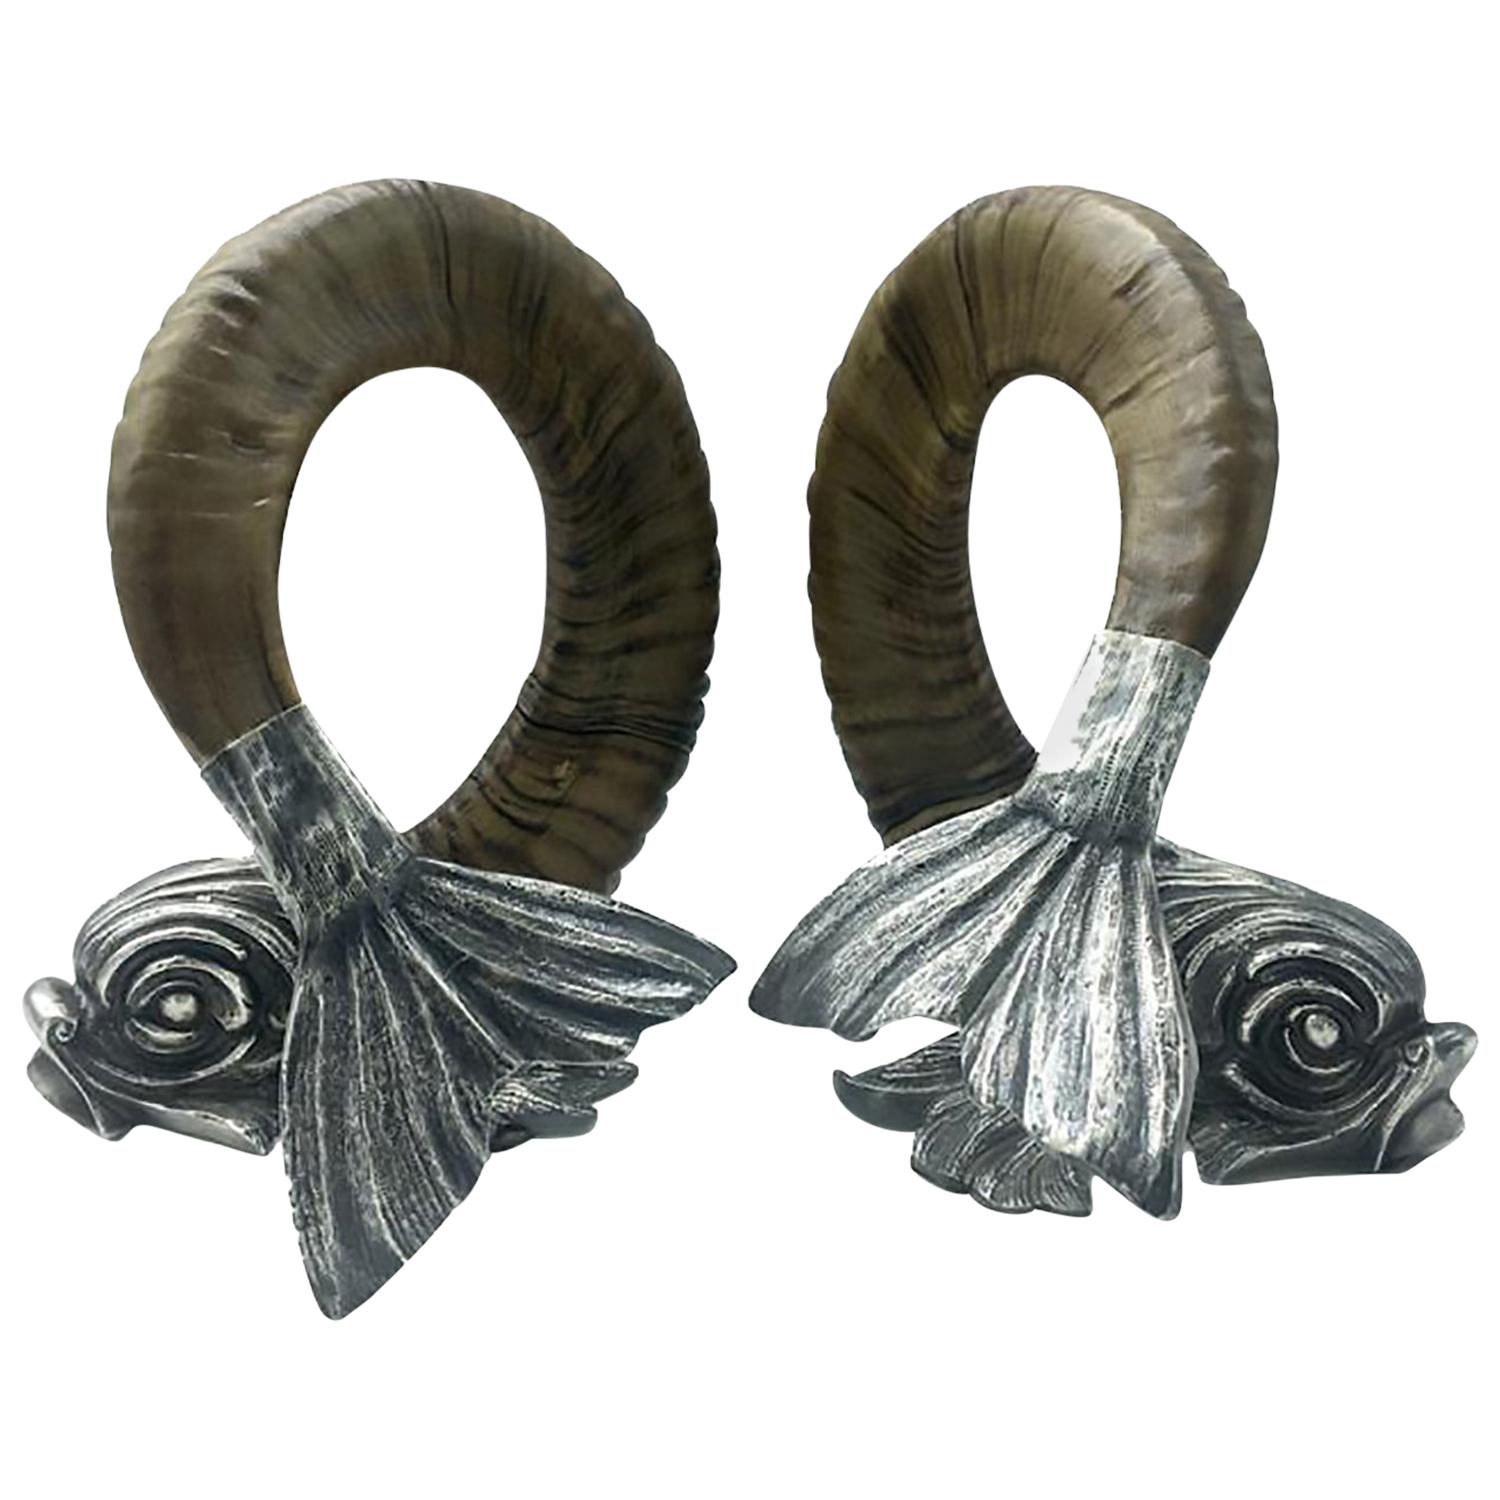 Pair of silver and horn dolphins by Gabriella Crespi.
Tabletop dolphins in ram’s horns fitted with silver head and tail, signed, 